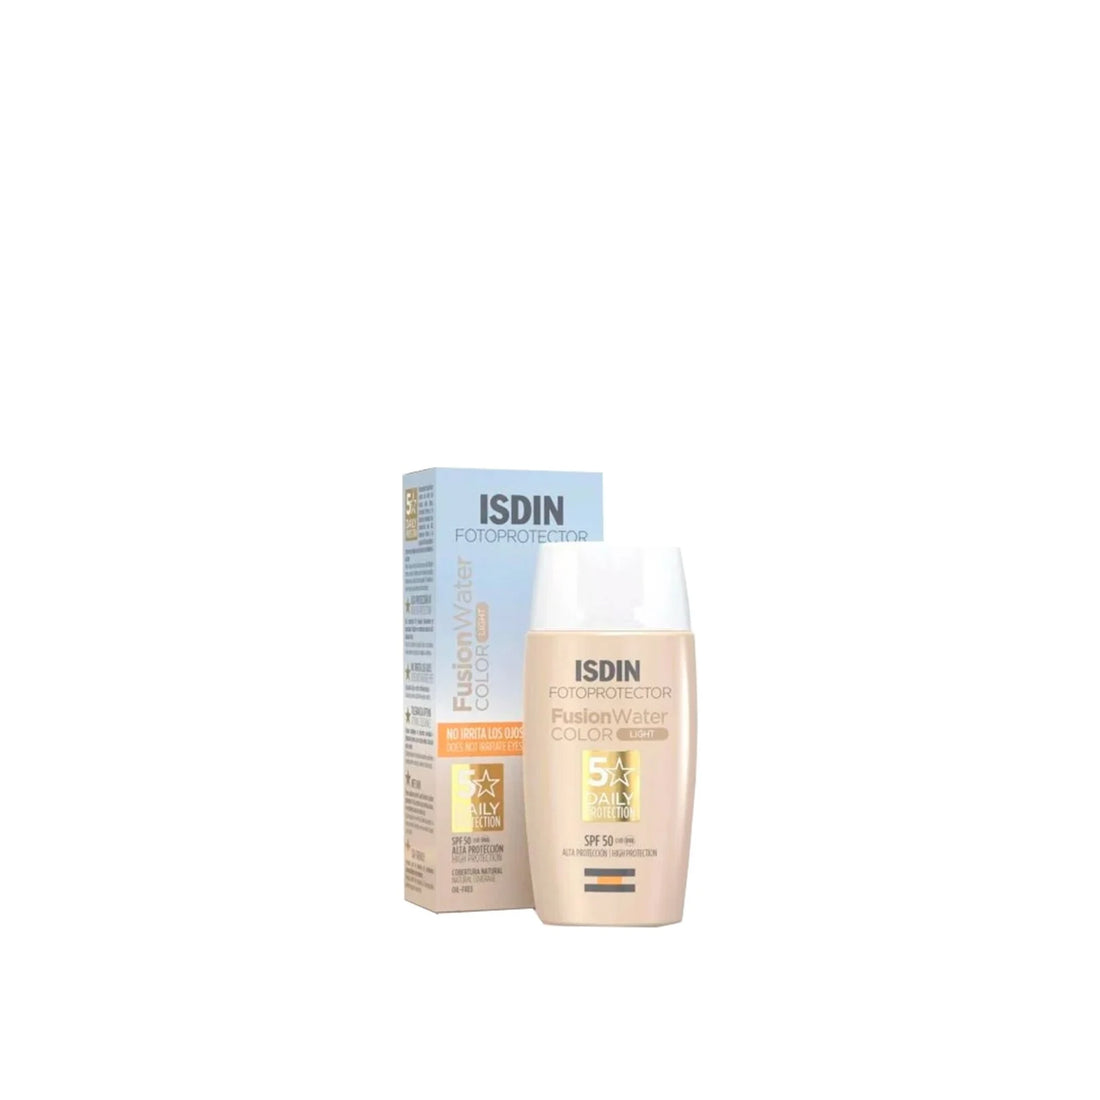 ISDIN Fotoprotector Fusion Water Color Light SPF50 50ml